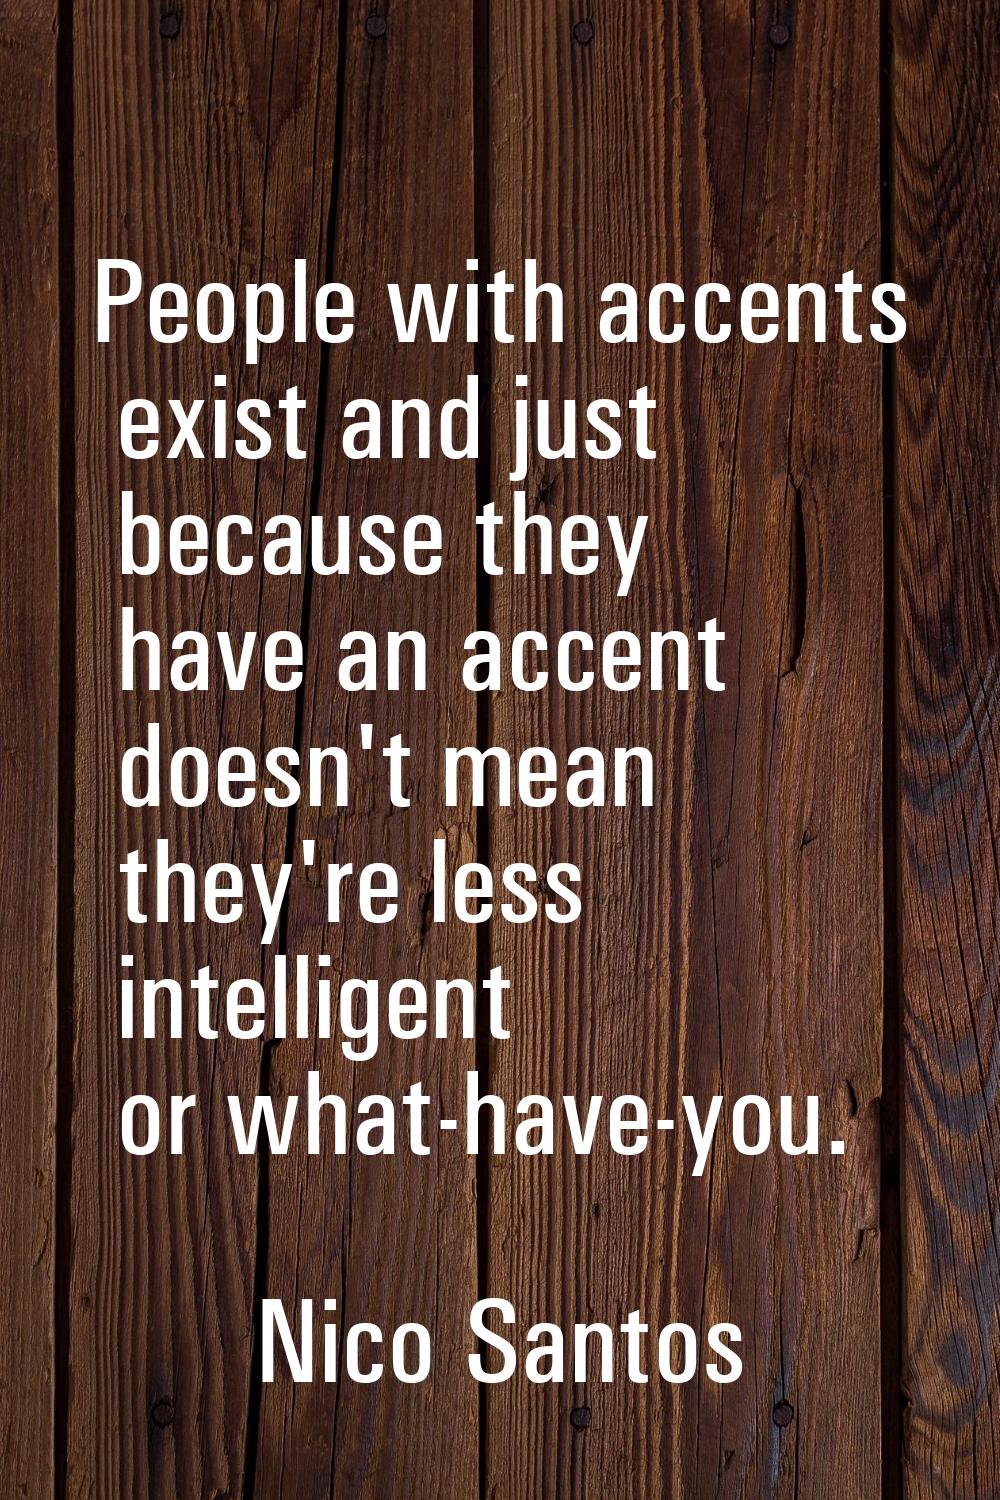 People with accents exist and just because they have an accent doesn't mean they're less intelligen